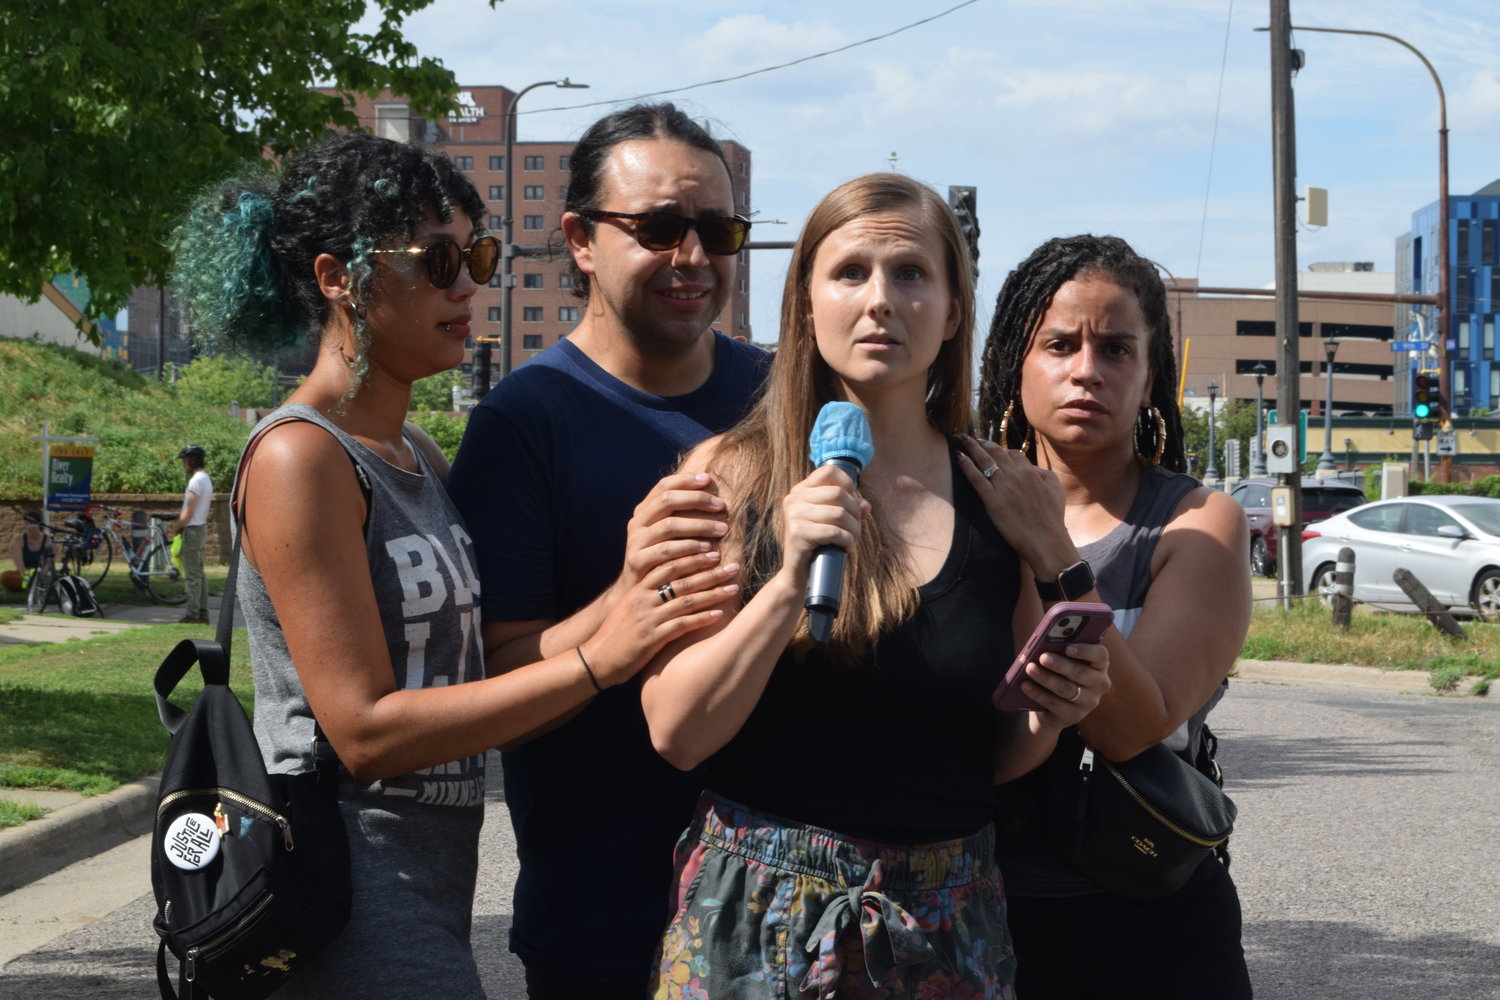 Tekle’s sister Kelsey Romero speaks during an event to honor him on Saturday, July 16, 2022, two days after he was shot by snipers. A social worker, Romero said, "Don't tell us you had no other choice. Don't tell us you need more training. We've seen you take people into custody safely." (Photo by Jill Boogren)